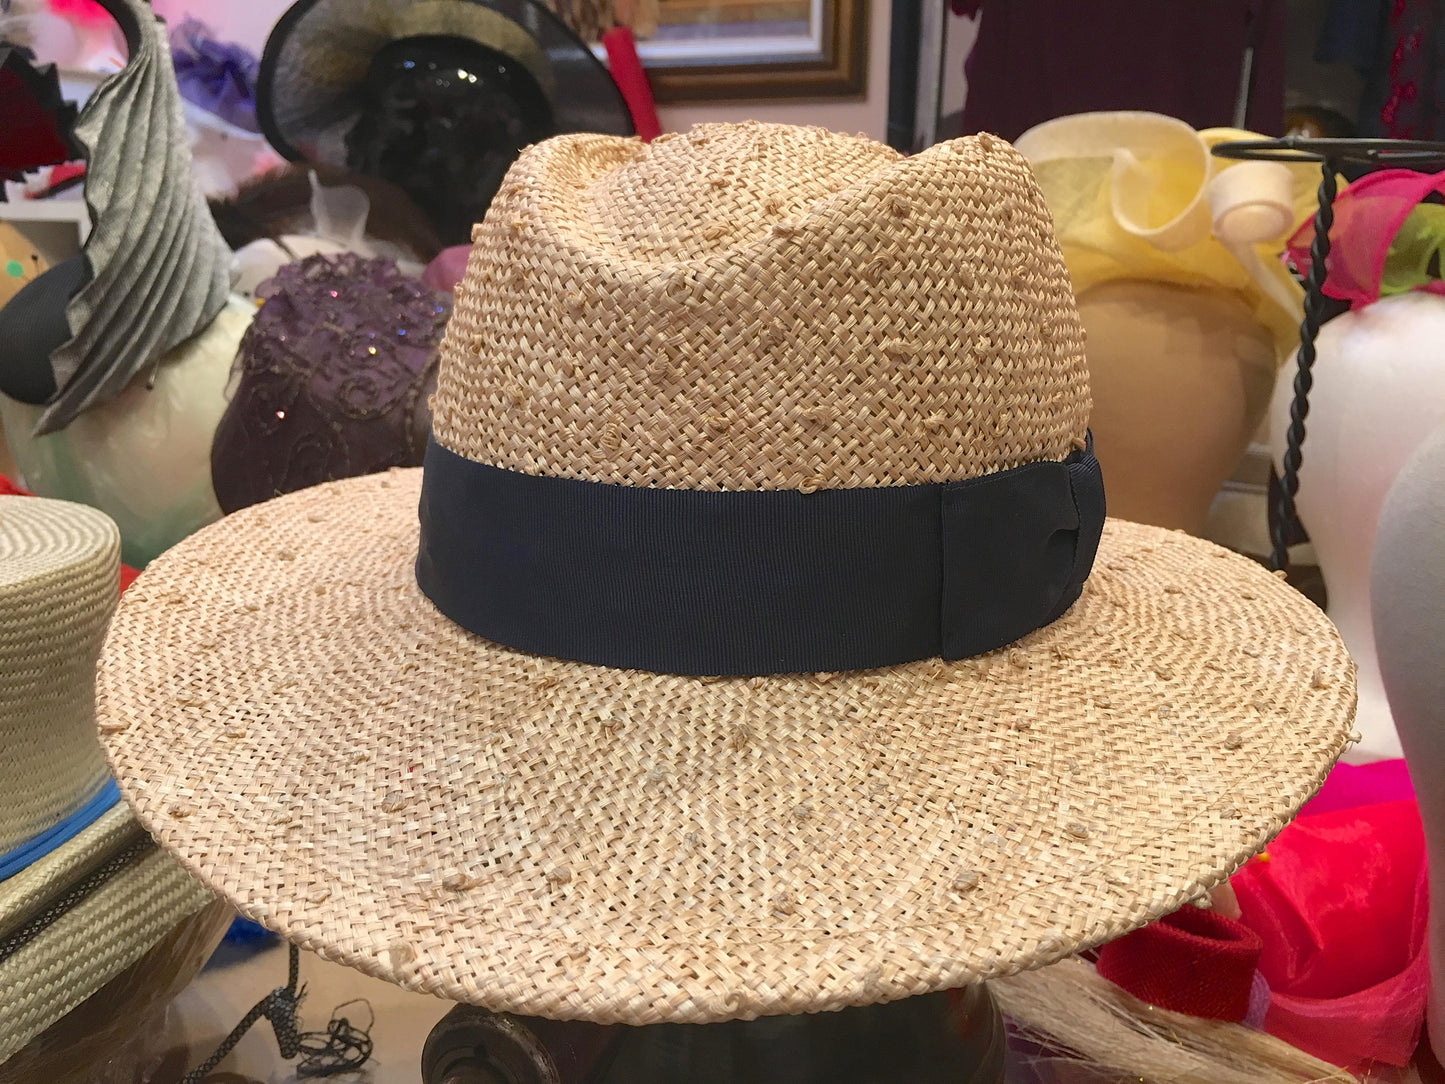 UNISEX FEDORA Knotted Straw Hat- Perfect for a man or a woman- Customize band color-Beach Hat-Sun Hat- Great Gift! Mens Fedora- Race Track